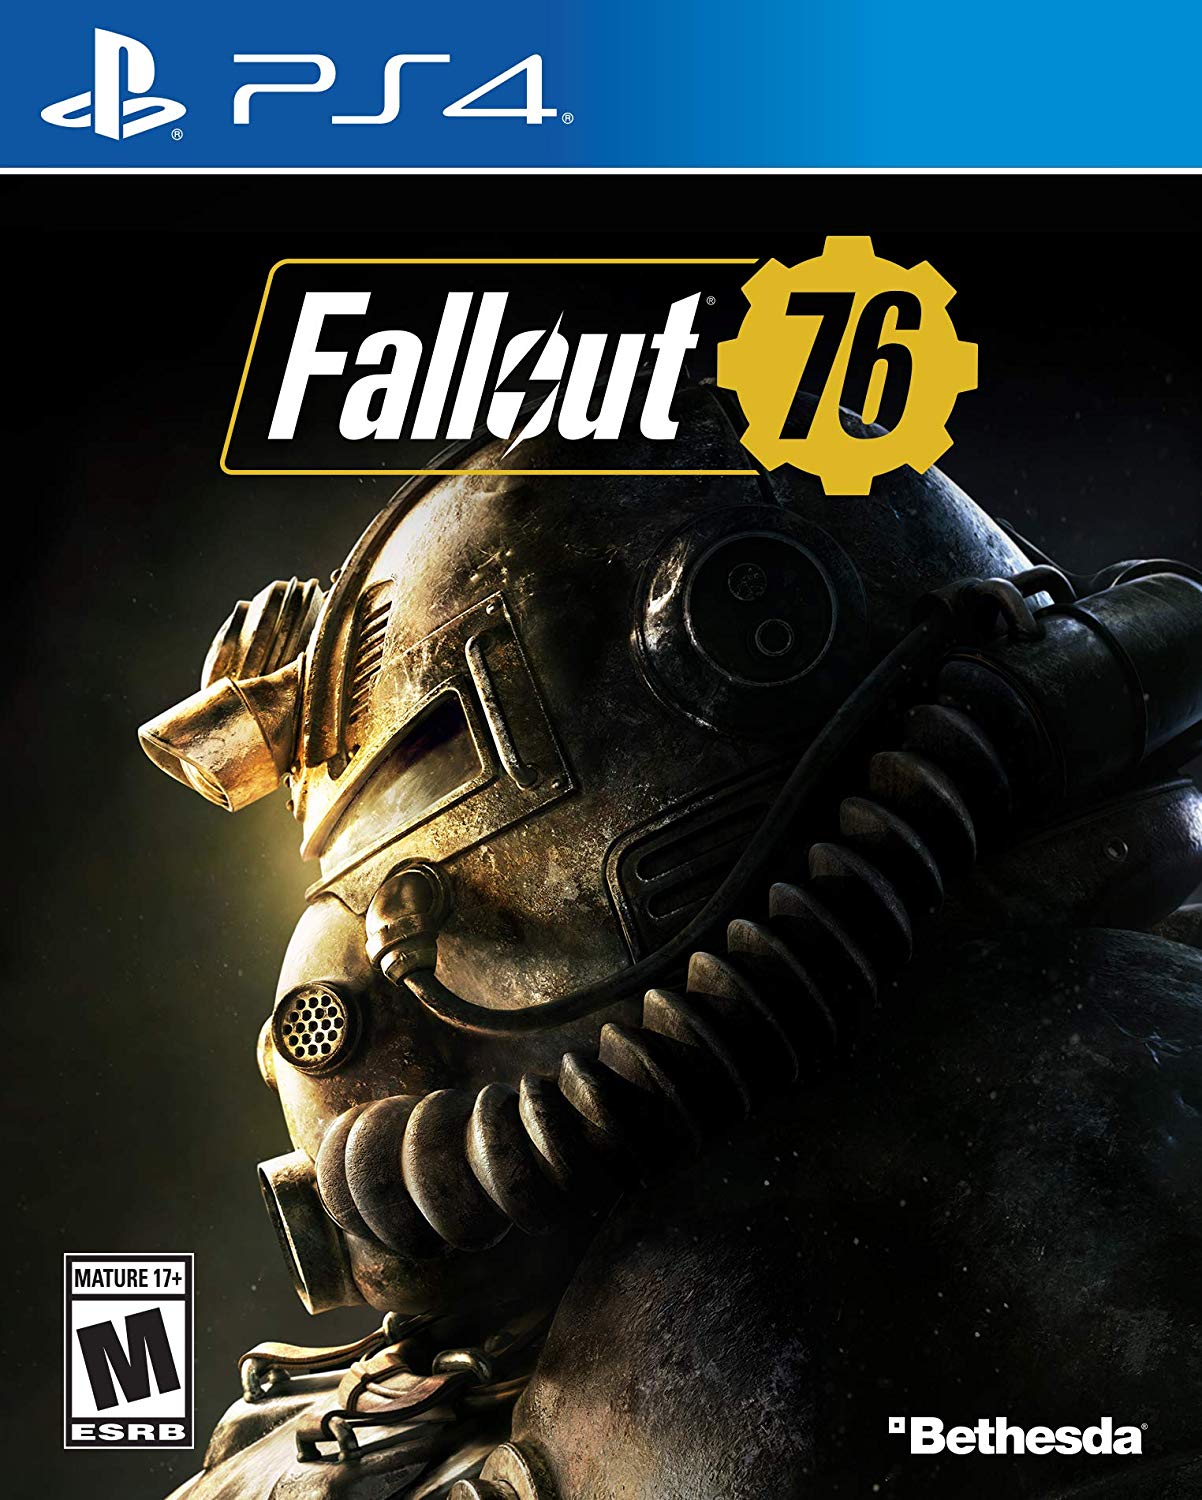 Fallout 76, Bethesda Softworks, PlayStation 4, [Physical], 093155173057 - image 1 of 20